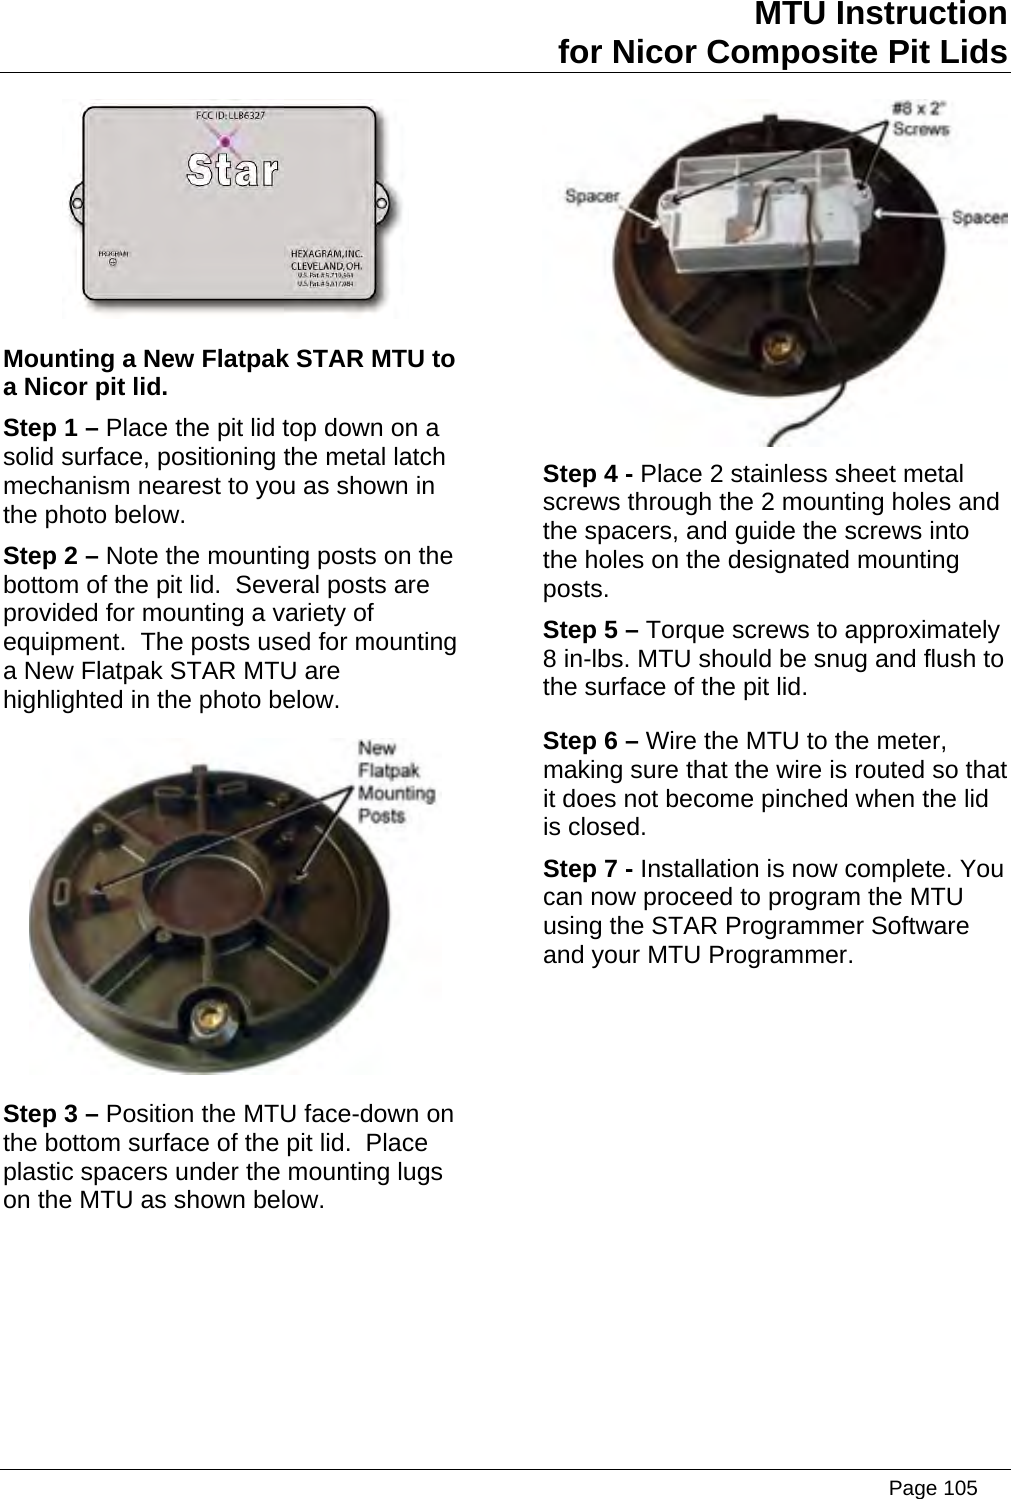 MTU Instruction for Nicor Composite Pit Lids  Mounting a New Flatpak STAR MTU to a Nicor pit lid. Step 1 – Place the pit lid top down on a solid surface, positioning the metal latch mechanism nearest to you as shown in the photo below. Step 2 – Note the mounting posts on the bottom of the pit lid.  Several posts are provided for mounting a variety of equipment.  The posts used for mounting a New Flatpak STAR MTU are highlighted in the photo below.  Step 3 – Position the MTU face-down on the bottom surface of the pit lid.  Place plastic spacers under the mounting lugs on the MTU as shown below.  Step 4 - Place 2 stainless sheet metal screws through the 2 mounting holes and the spacers, and guide the screws into the holes on the designated mounting posts. Step 5 – Torque screws to approximately 8 in-lbs. MTU should be snug and flush to the surface of the pit lid. Step 6 – Wire the MTU to the meter, making sure that the wire is routed so that it does not become pinched when the lid is closed. Step 7 - Installation is now complete. You can now proceed to program the MTU using the STAR Programmer Software and your MTU Programmer.   Page 105